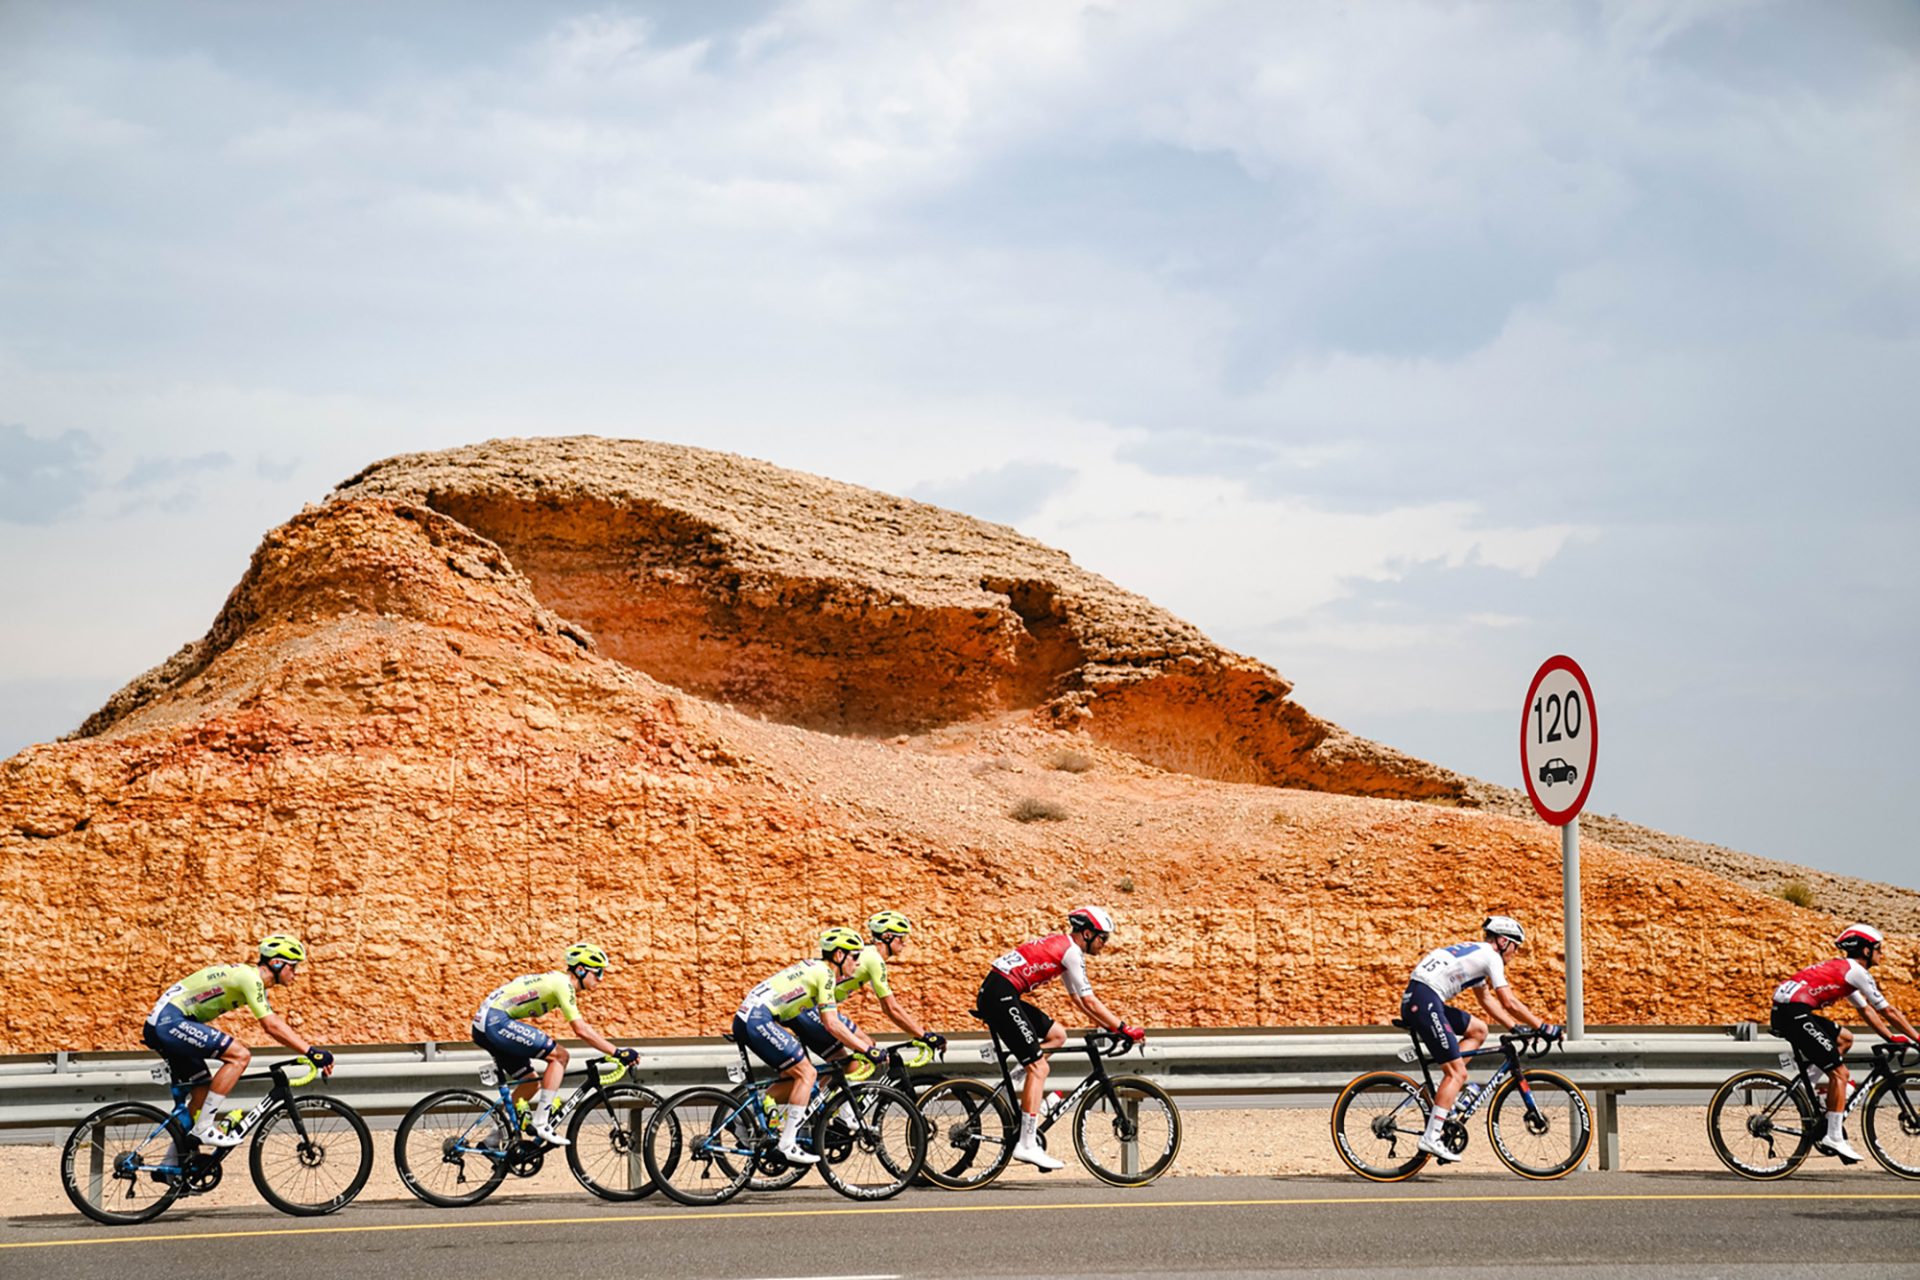 The peloton during Tour of Oman stage 3.